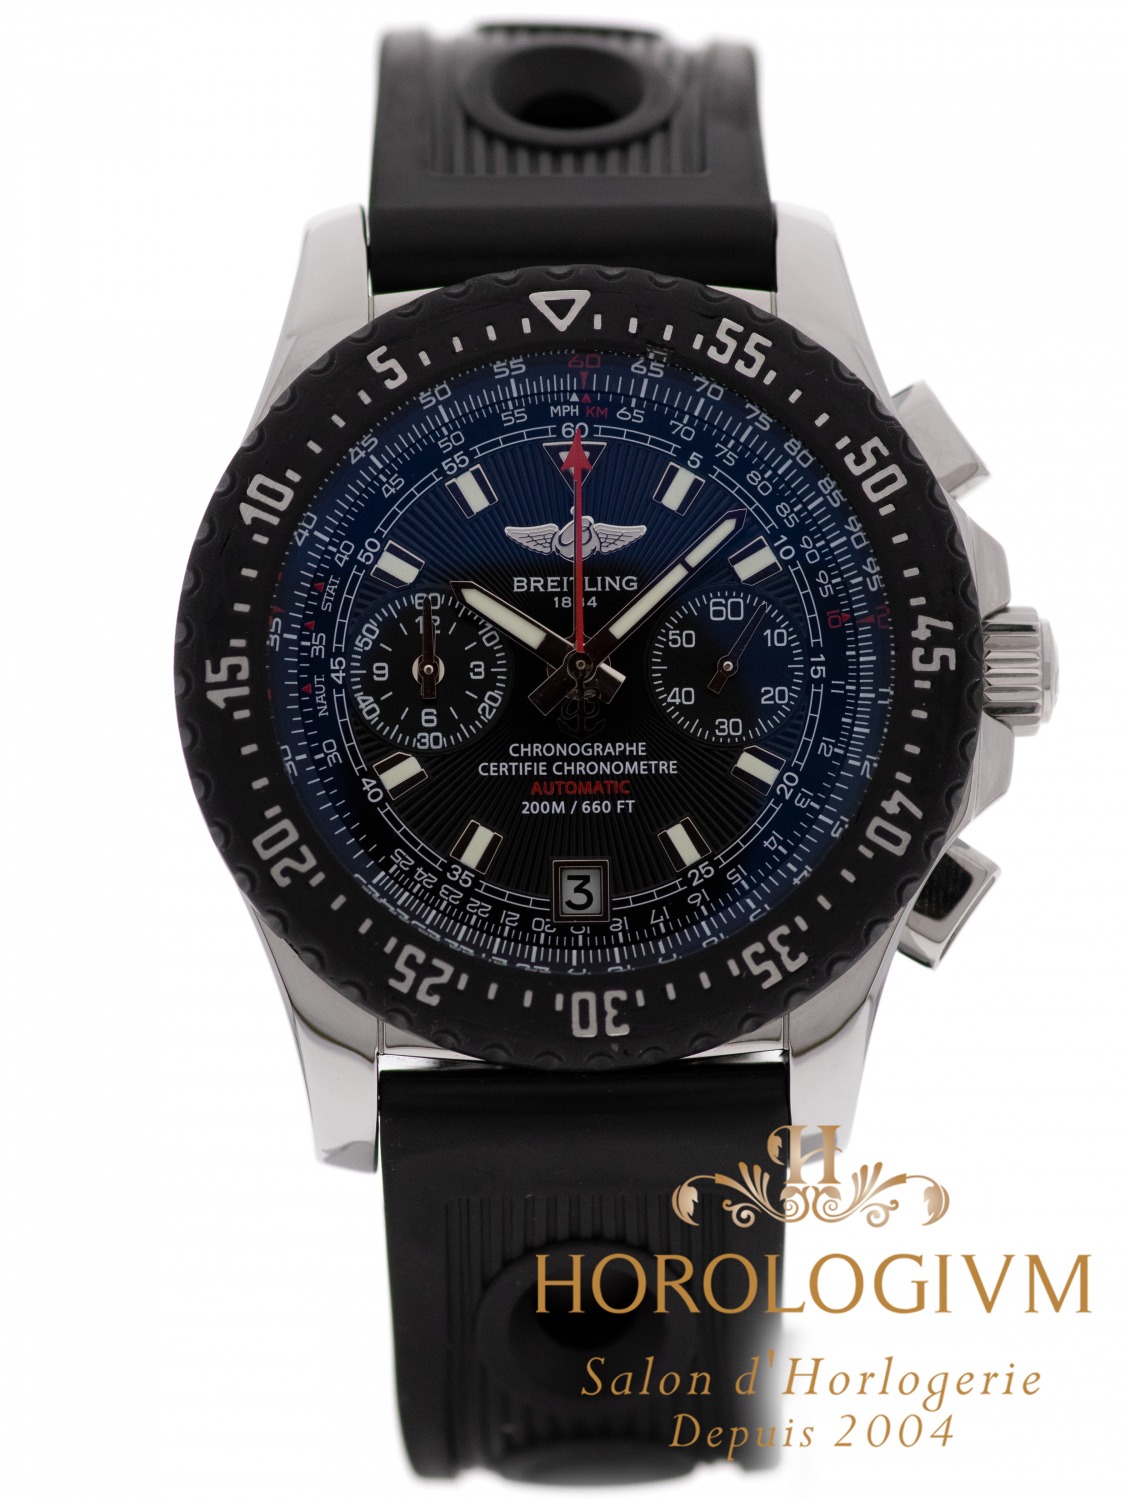 Breitling Skyracer Chronograph 44MM watch, silver (case) and black (bezel)